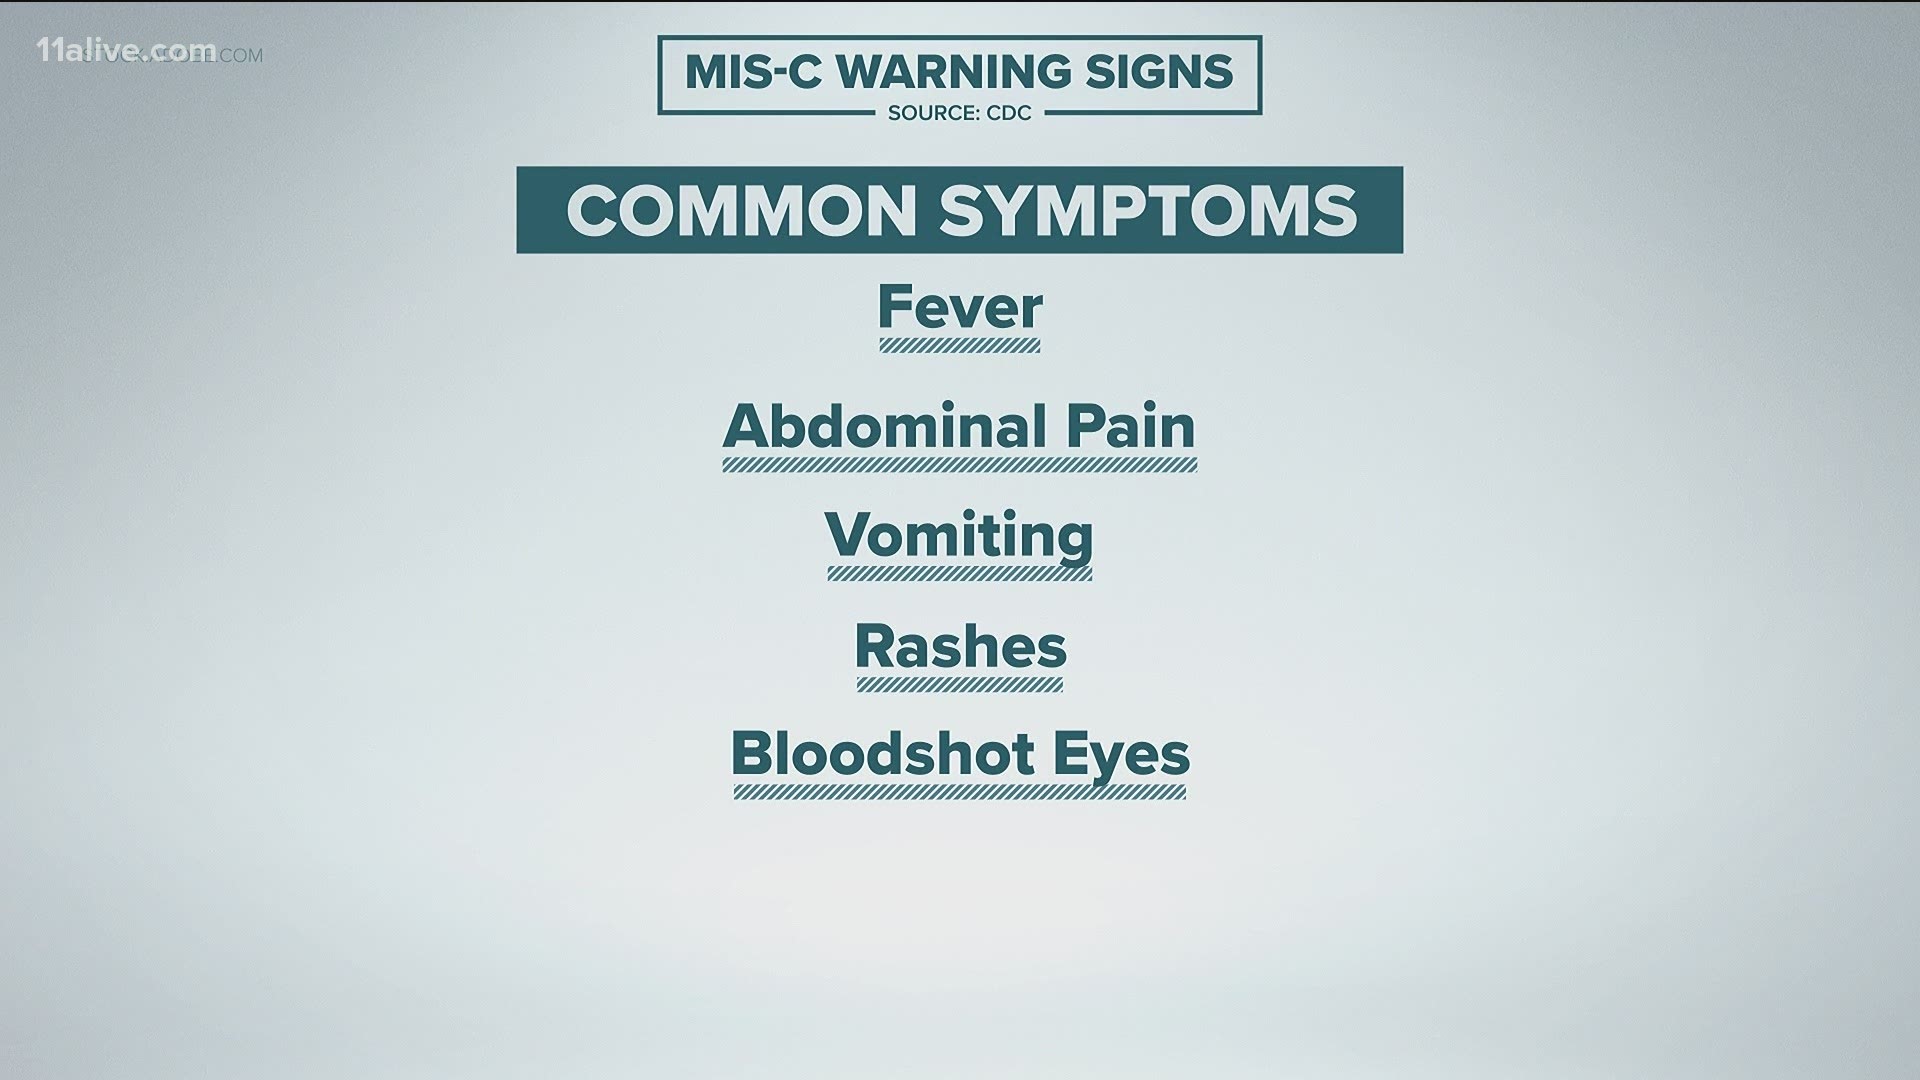 Multisystem inflammatory syndrome (MIS-C) in children, while rare, has been the predominant complication associated with COVID in kids.